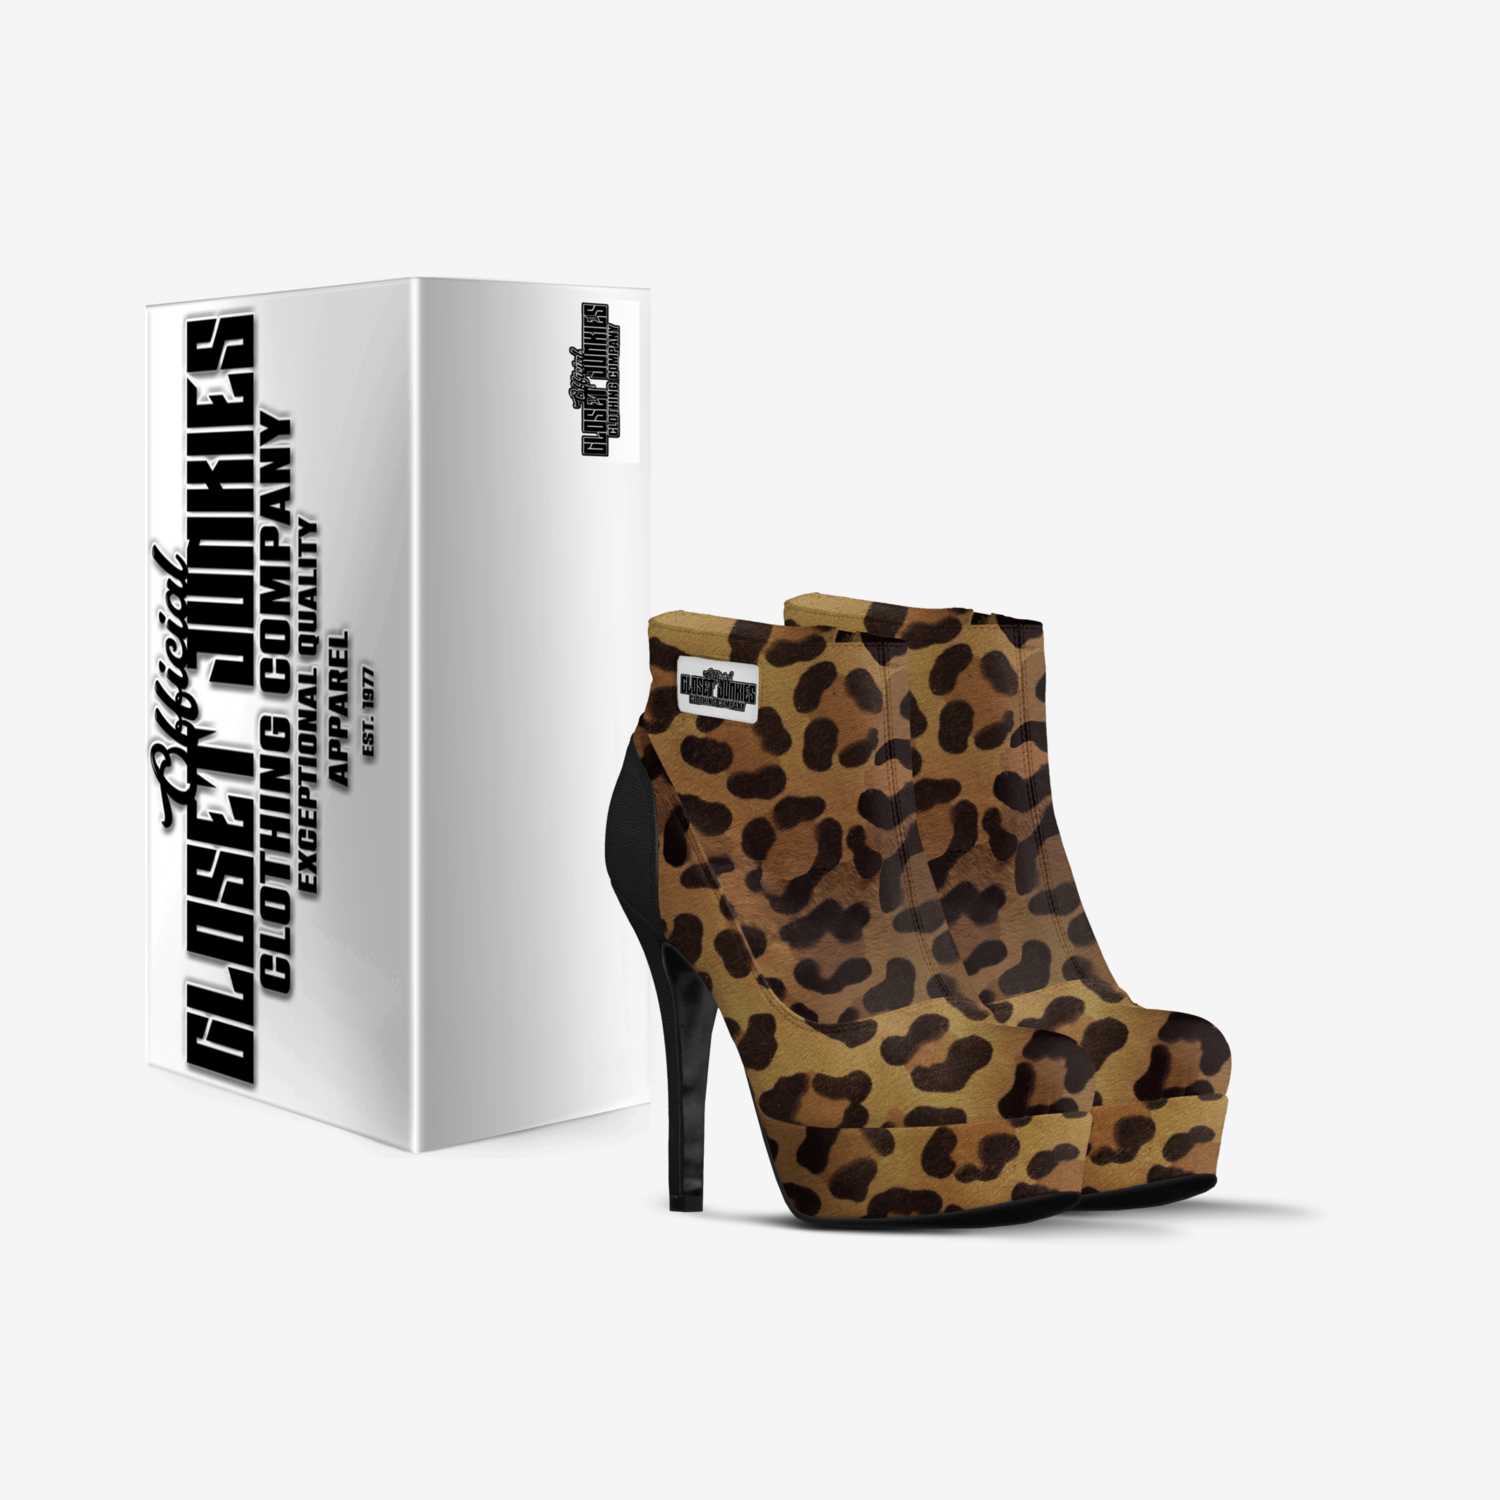 The Cougar custom made in Italy shoes by Supreme Harper | Box view